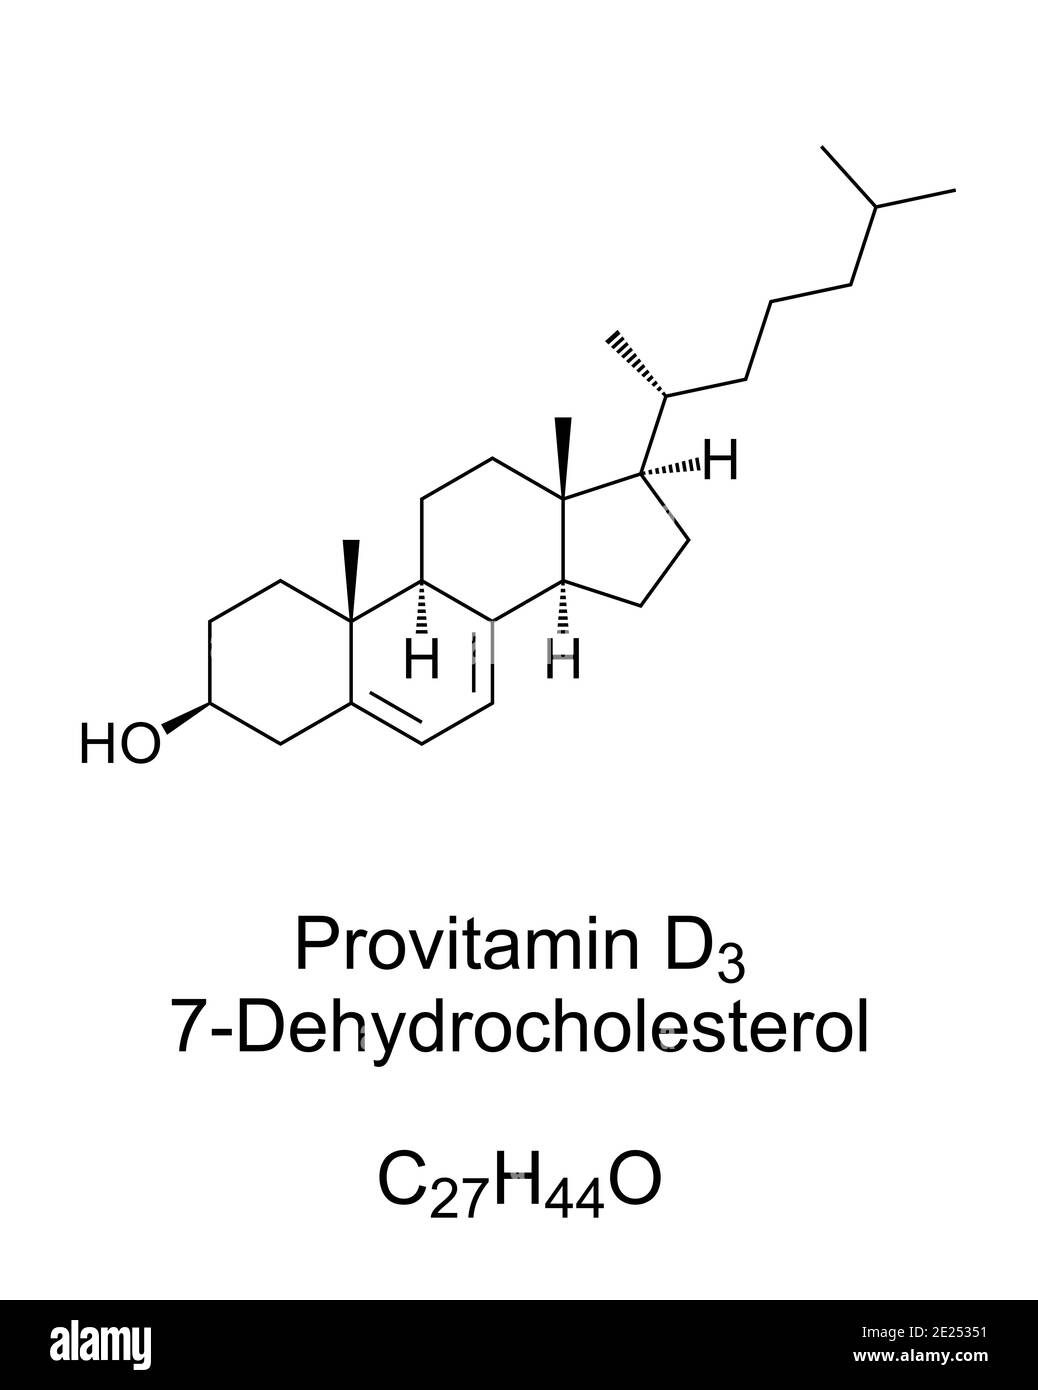 Provitamin form of Vitamin D3, chemical structure and skeletal formula. 7-Dehydrocholesterol, 7-DHC. Zoosterol, functions as cholesterol precursor. Stock Photo